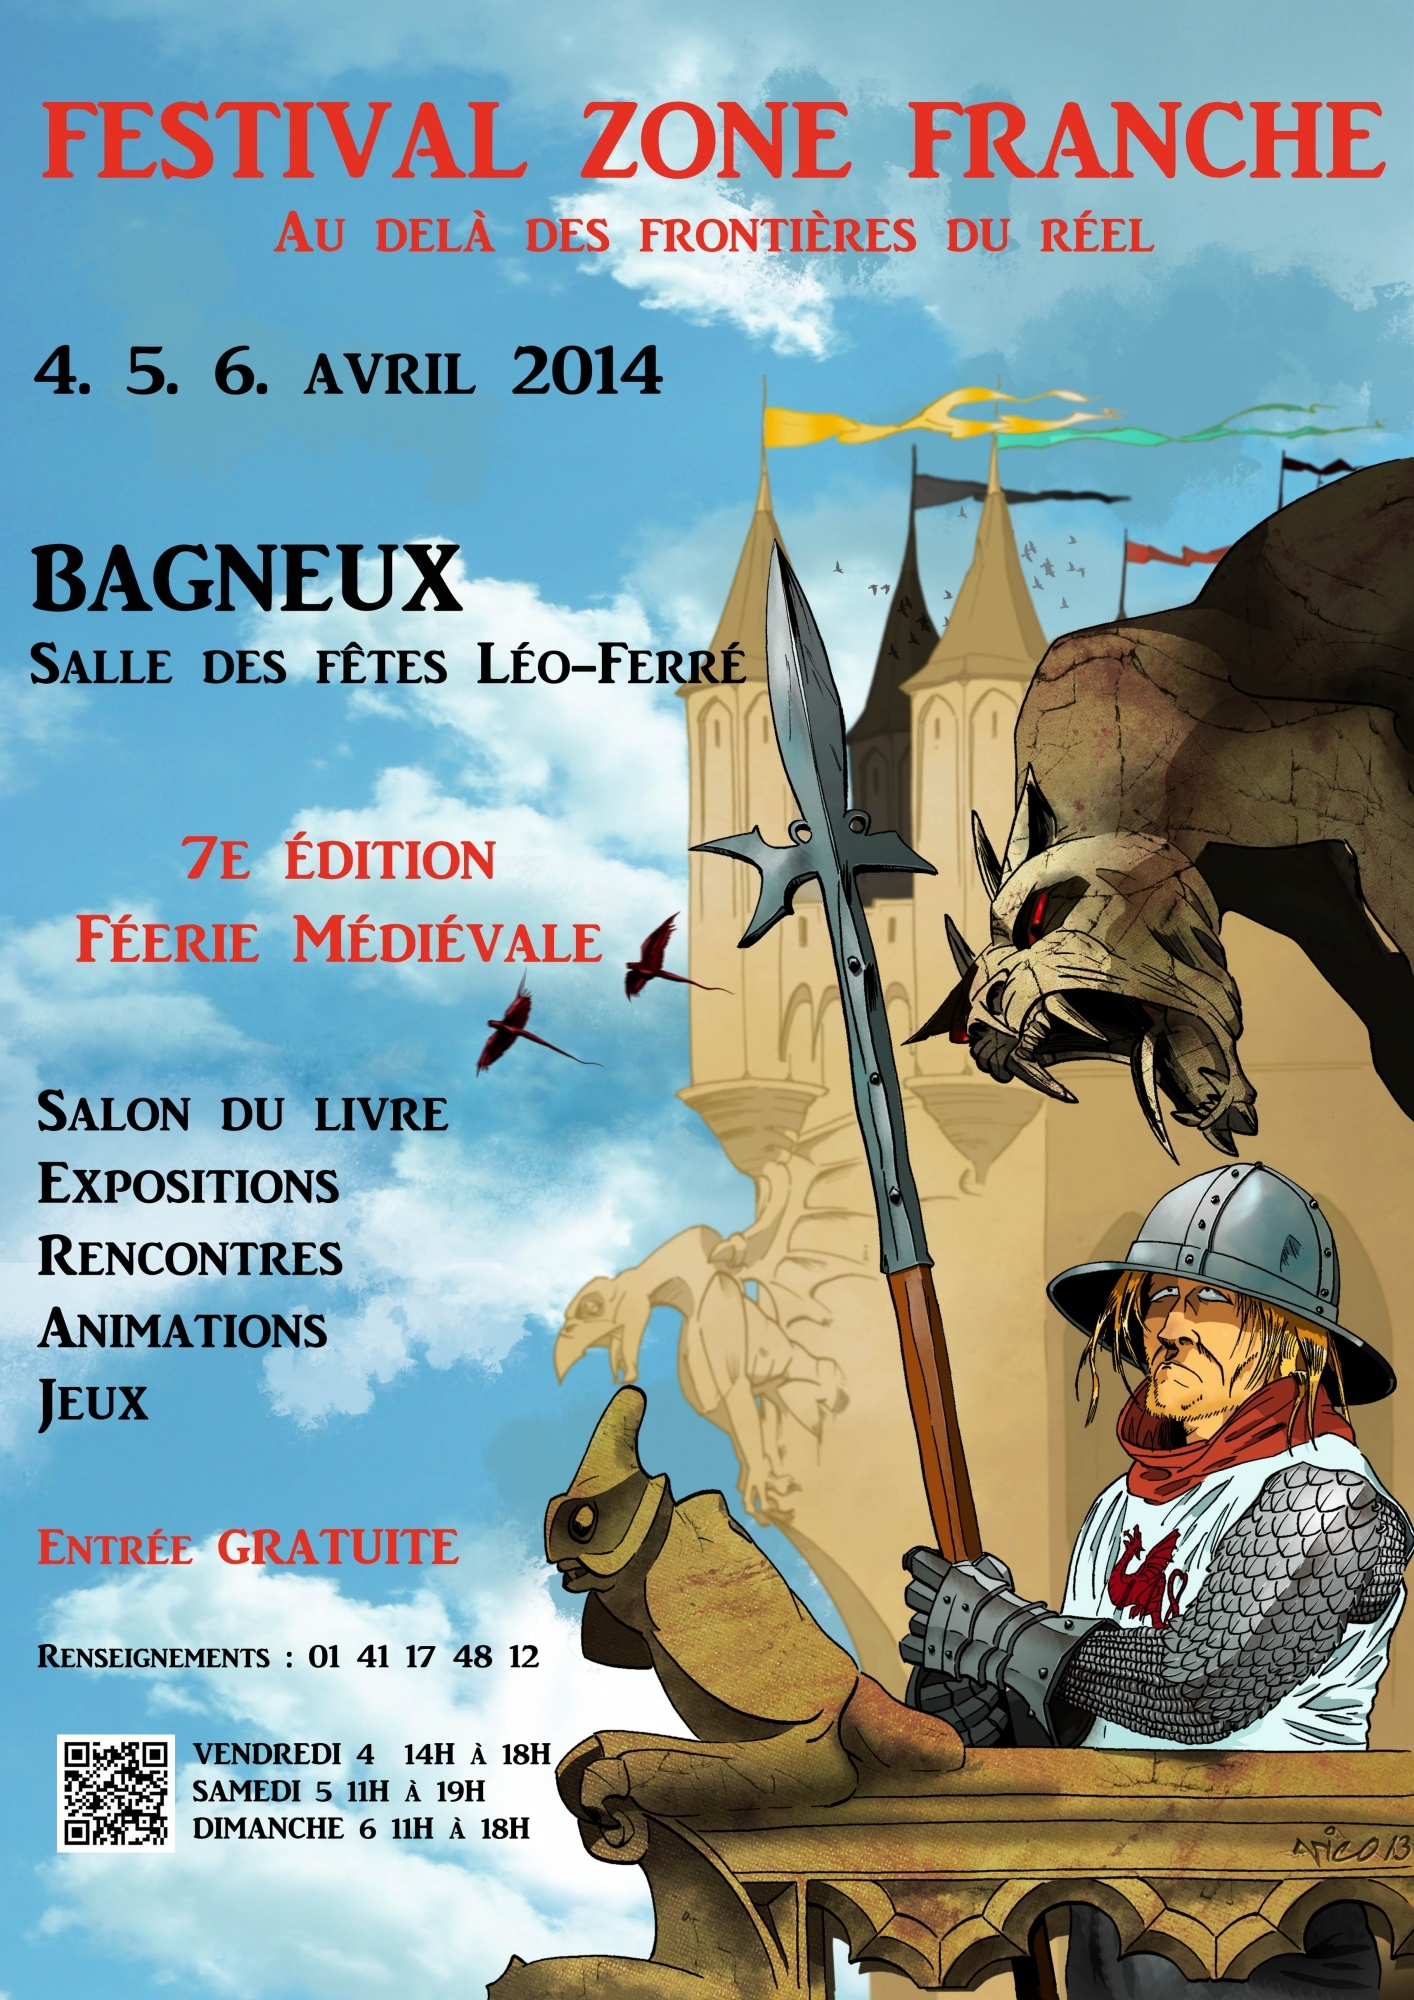 BAGNEUX (92)